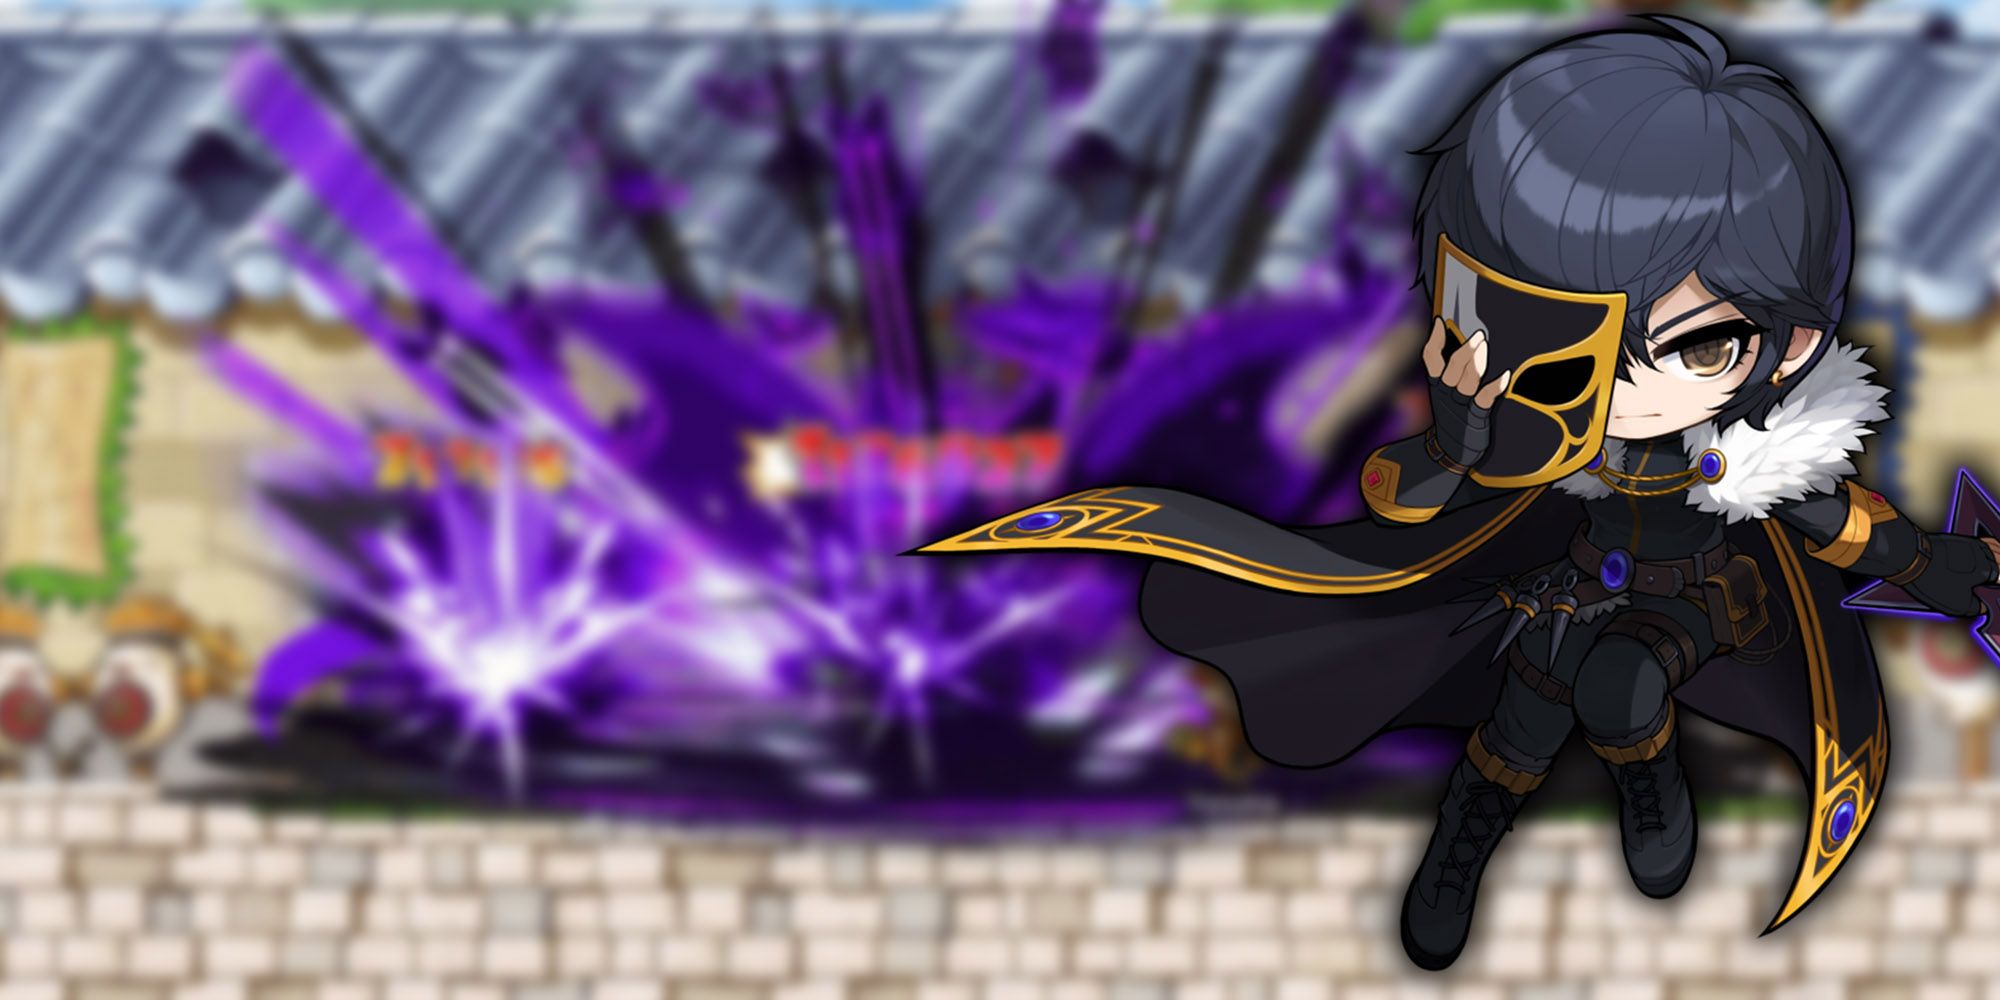 Maplestory - Nightwalker Using Some Wide AoE Shadowy Skill With PNG Of Night Walker On Top